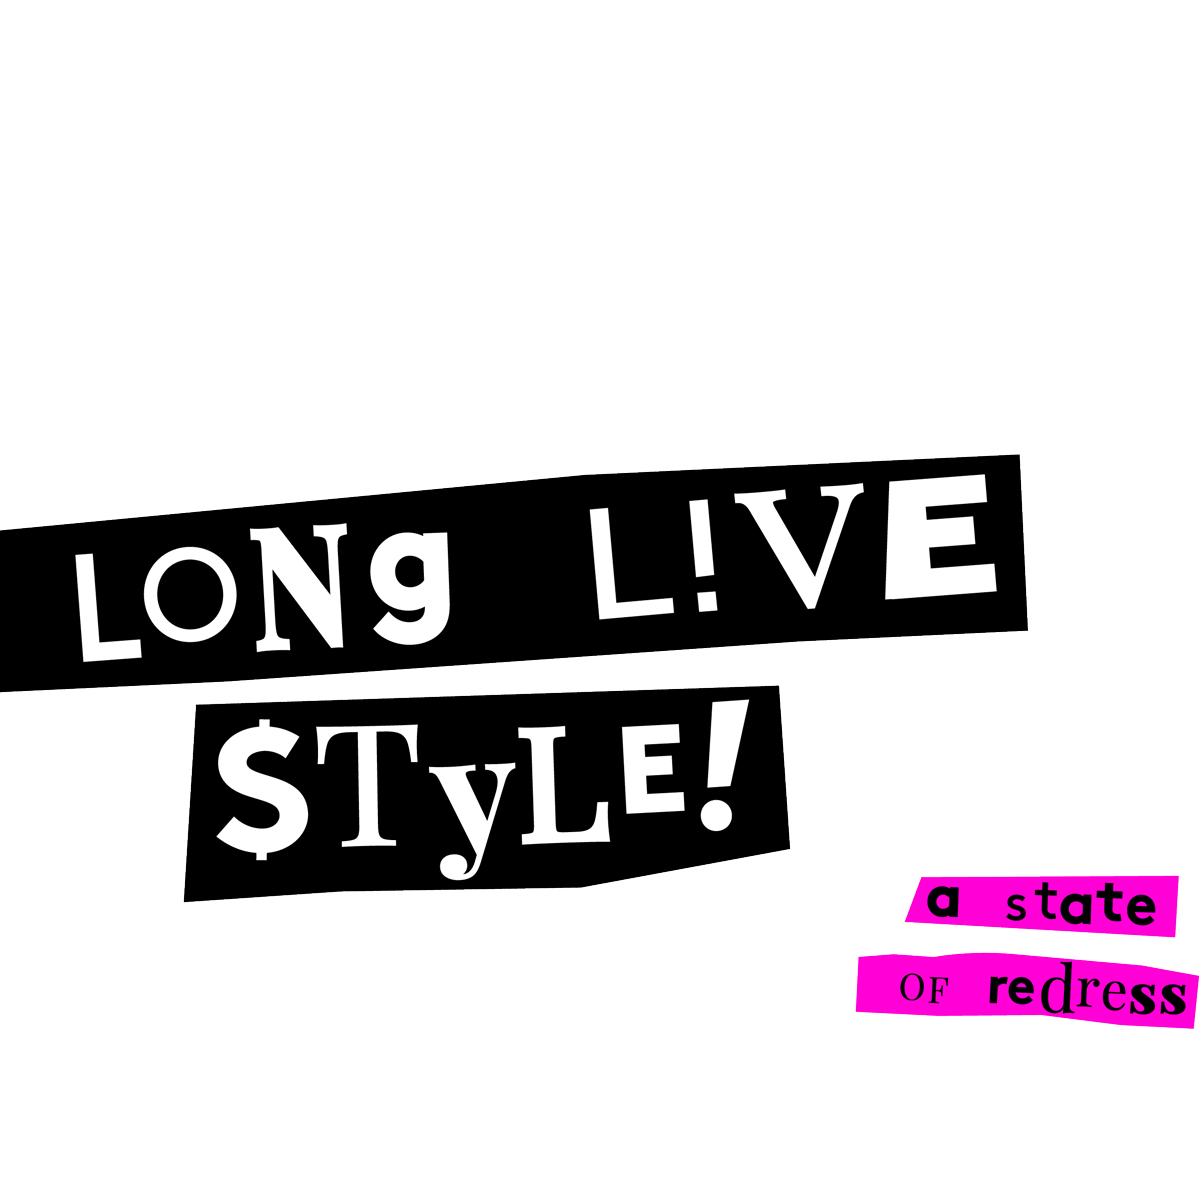 Long Live style. A state of redress.